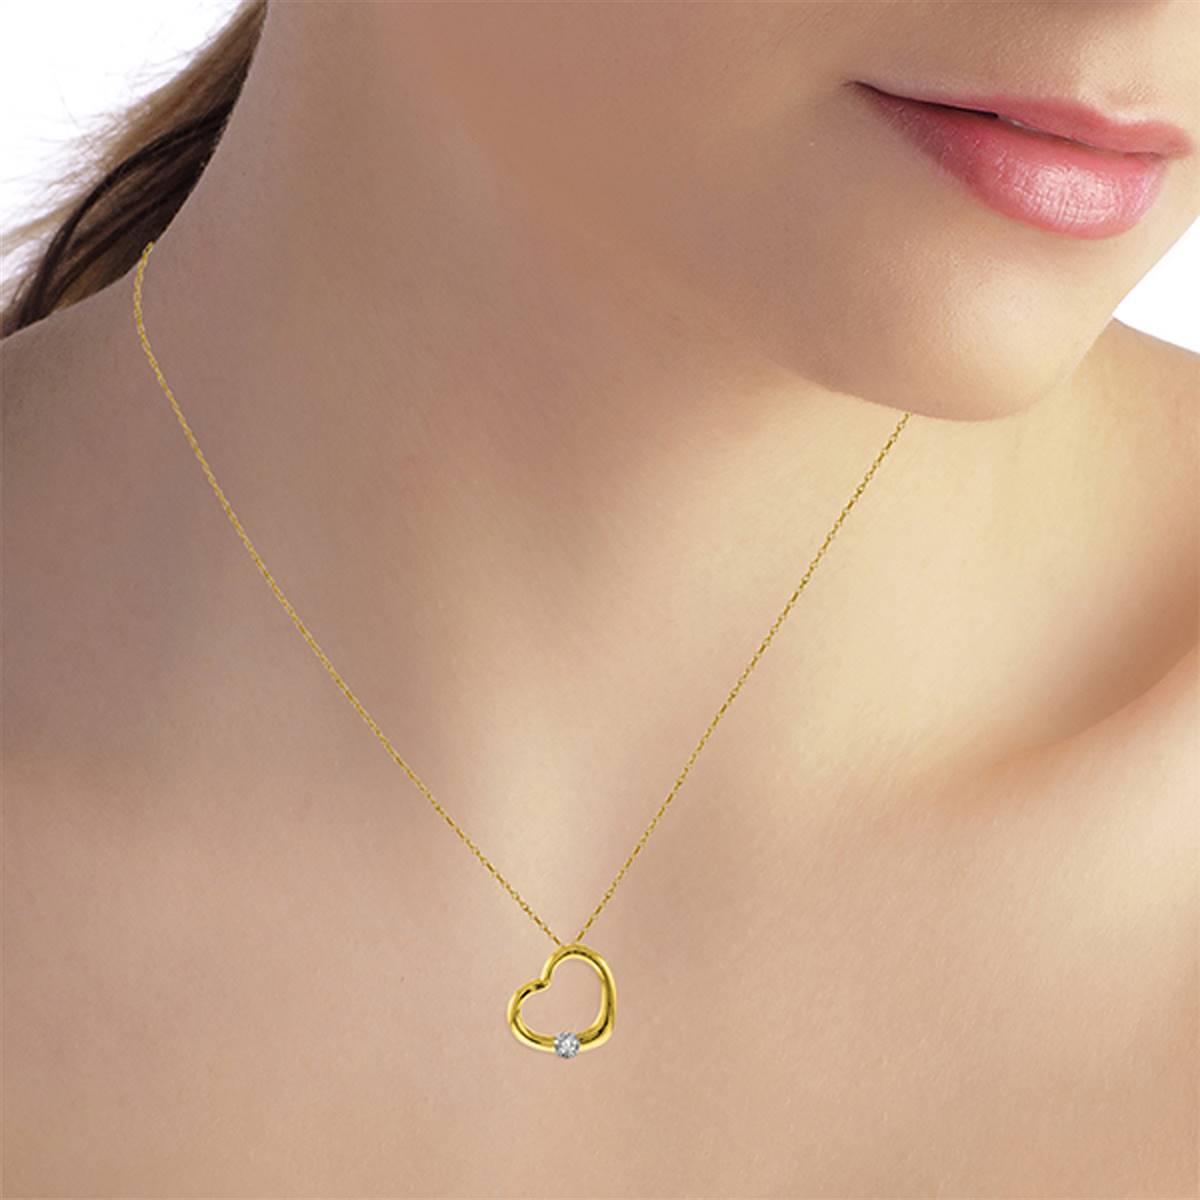 14K Solid Yellow Gold Heart Natural Diamond Necklace